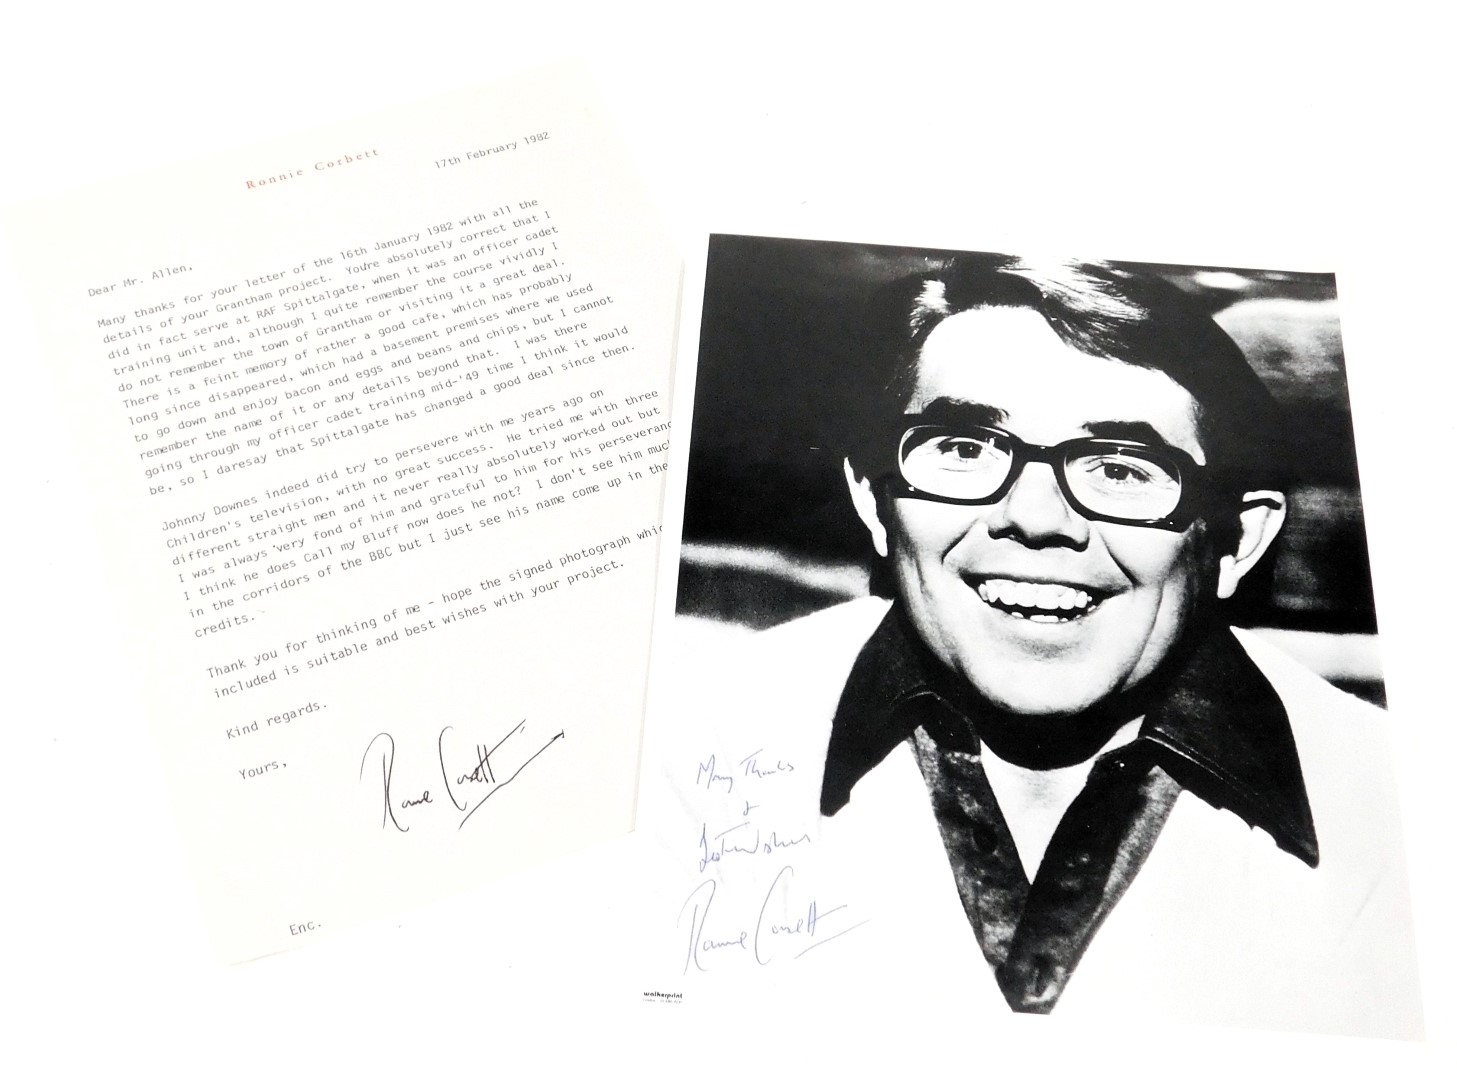 Grantham Interest. A signed letter from Ronnie Corbett, dated 17th February 1982, relating to his ti